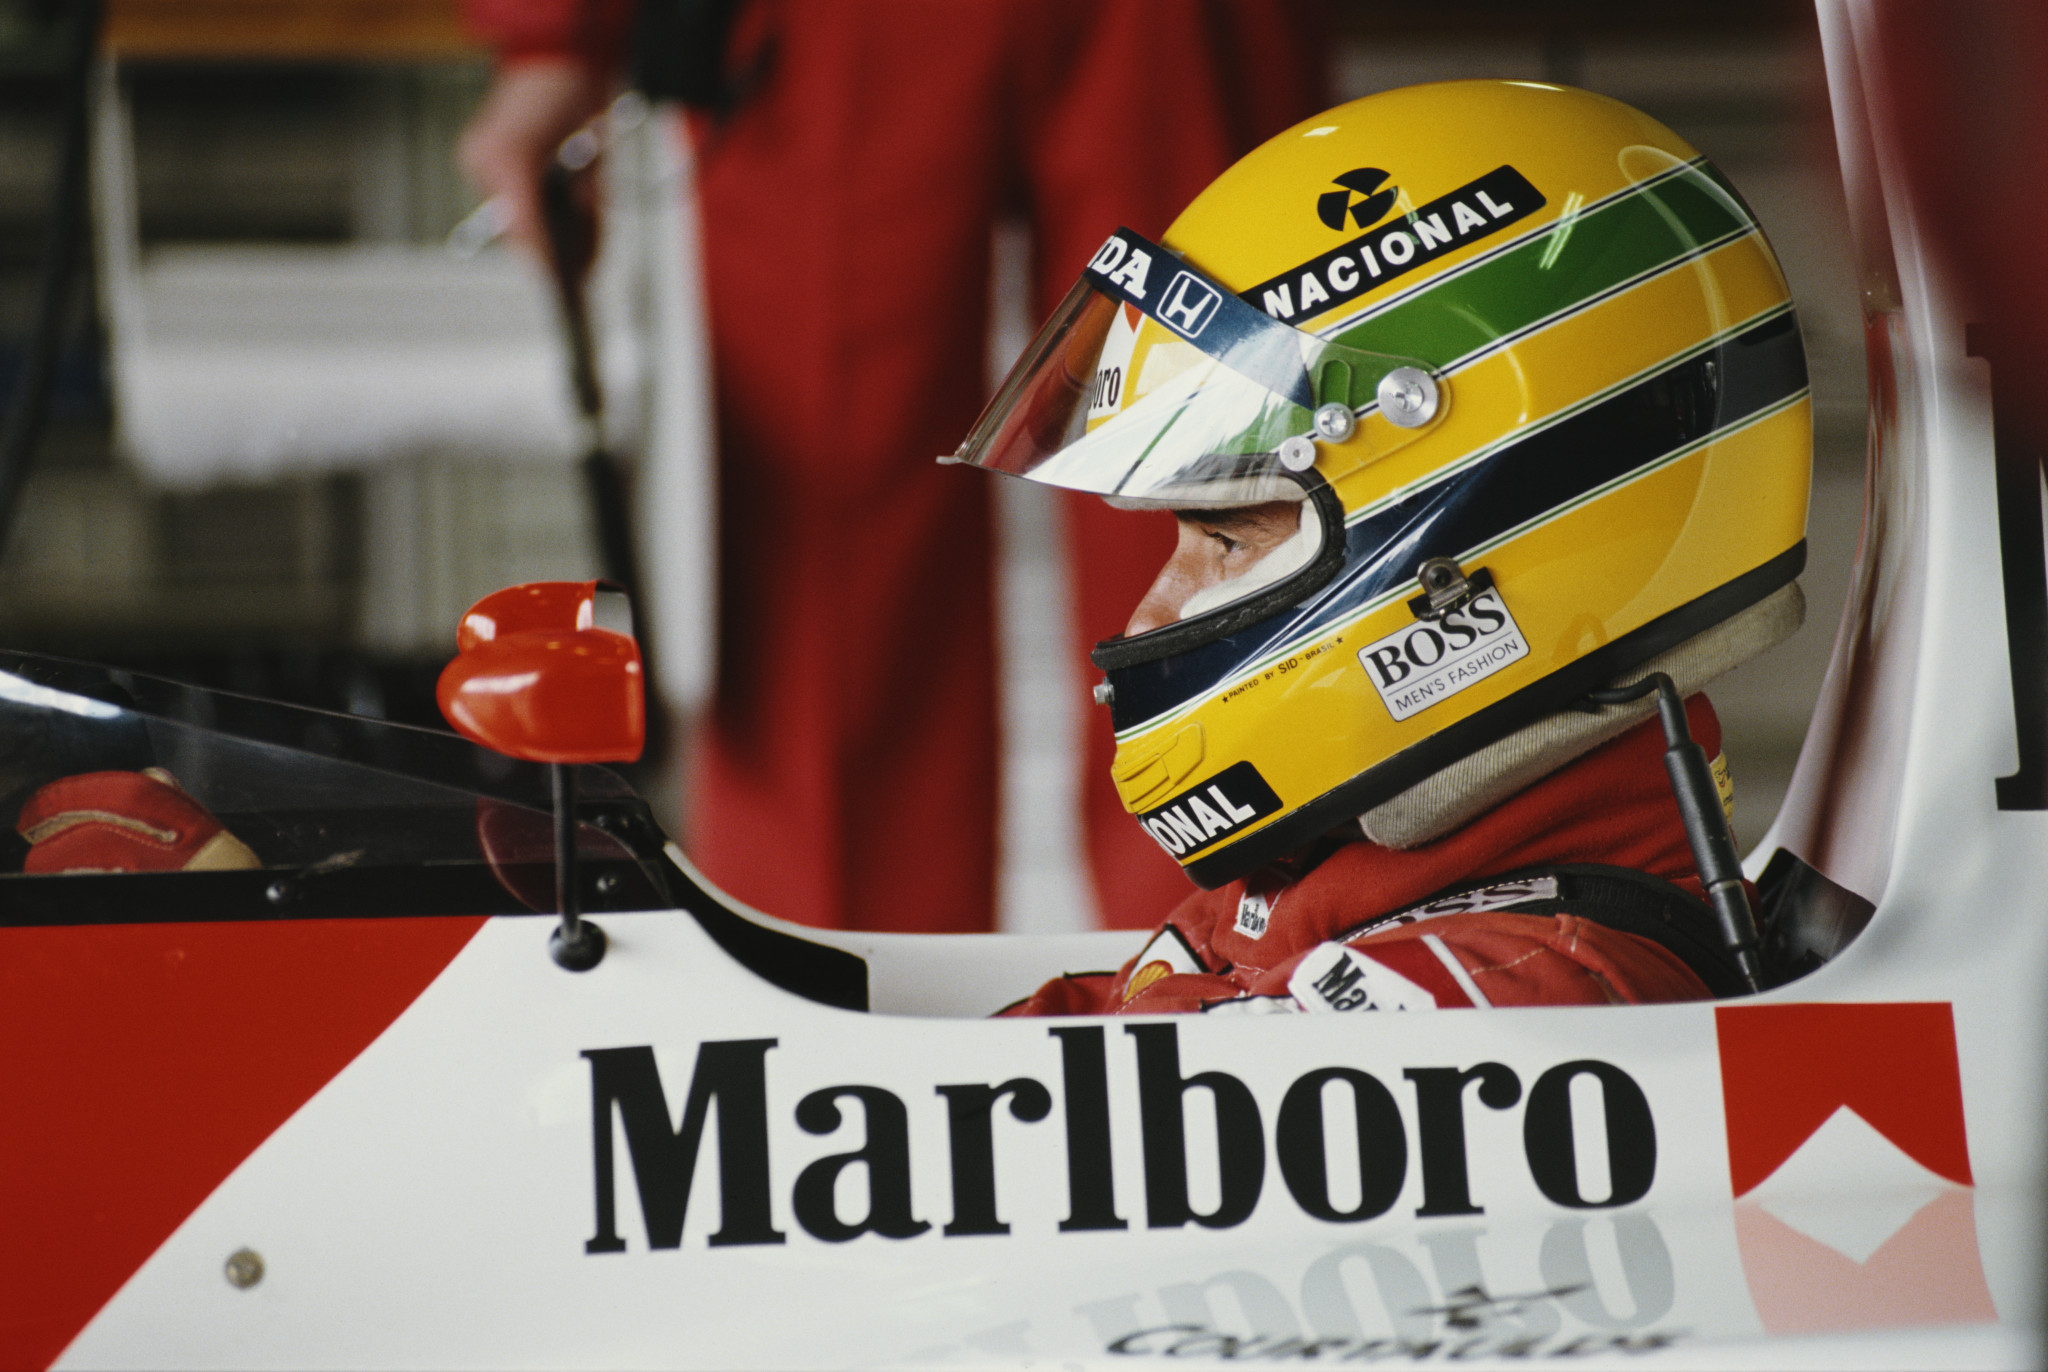 Brazilian F1 legend Senna's death has been mourned by many 30 years on. GETTY IMAGES